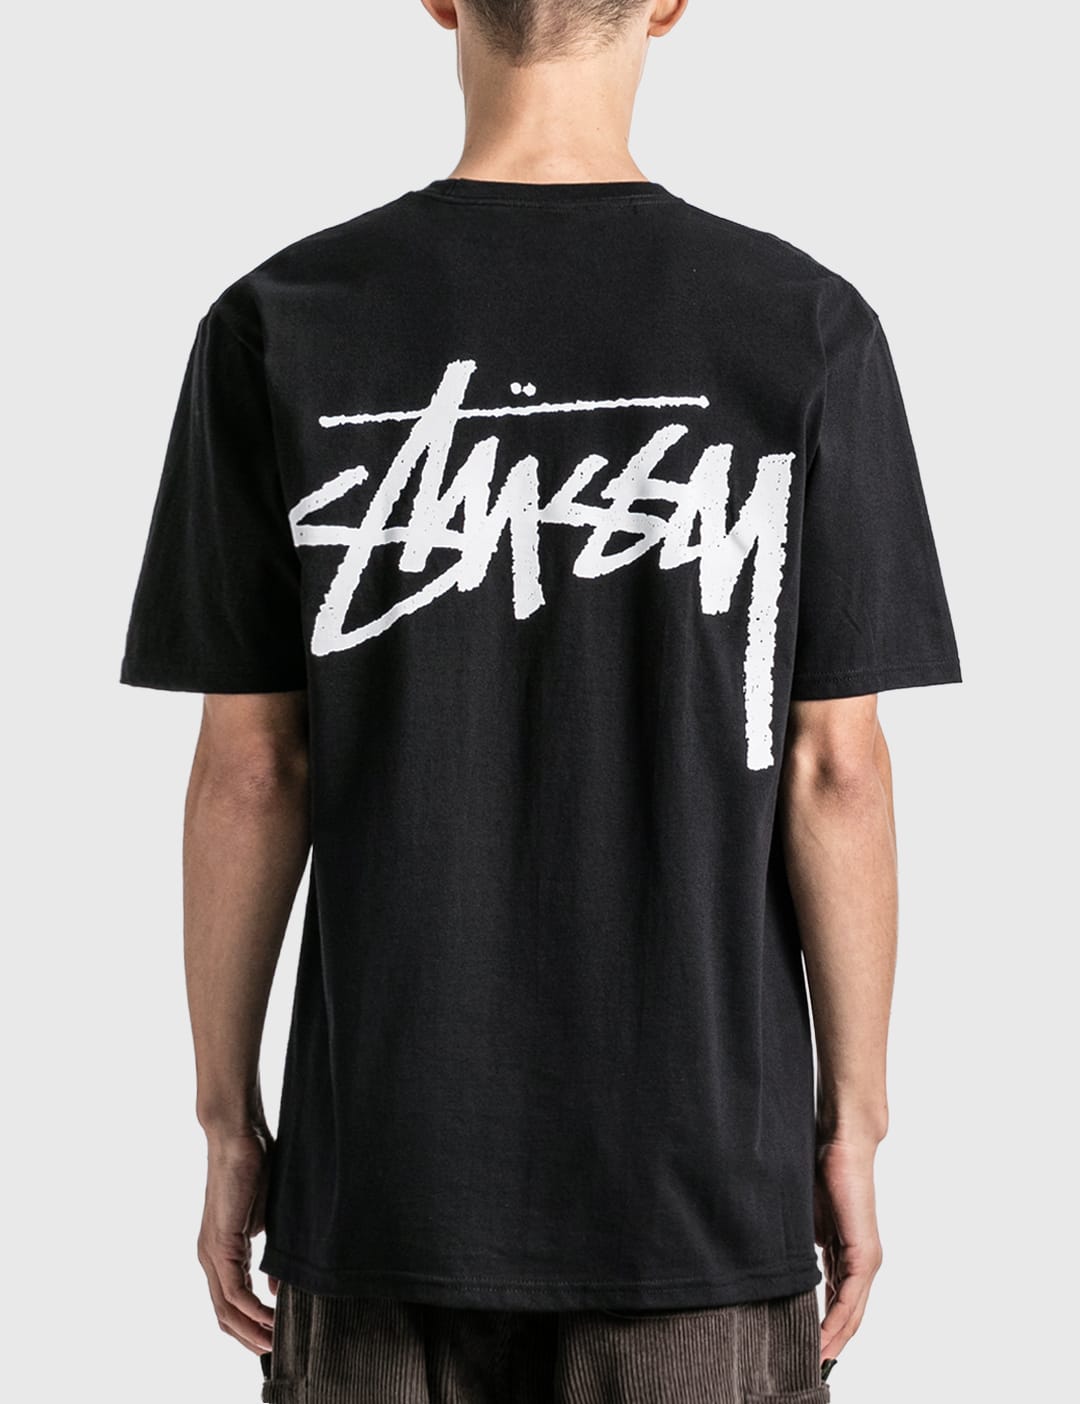 Stüssy - BIG STOCK T-SHIRT | HBX - Globally Curated Fashion and